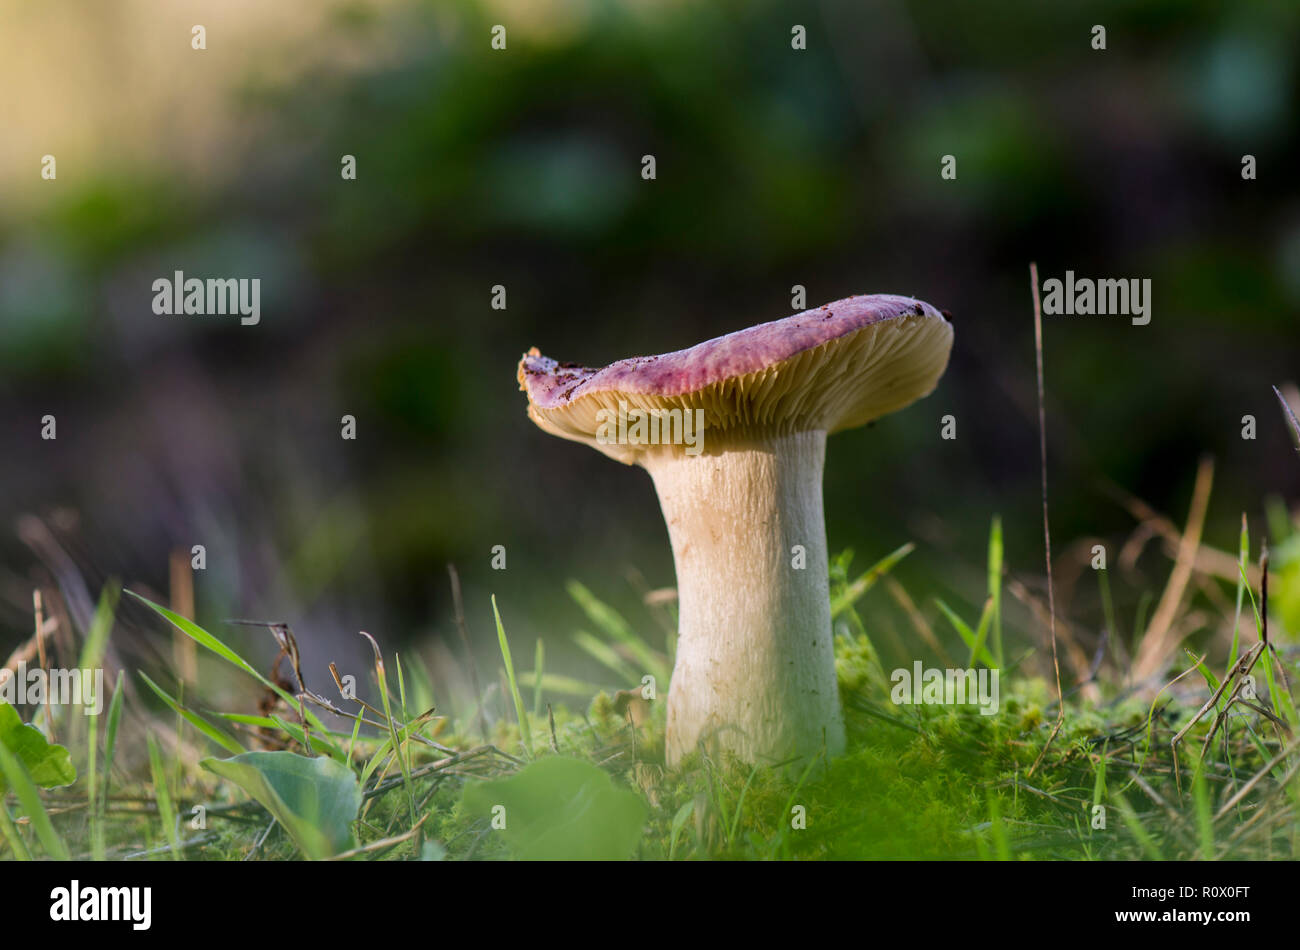 Mushroom, Russula sp. in forest, close up, macro, Spain. Stock Photo